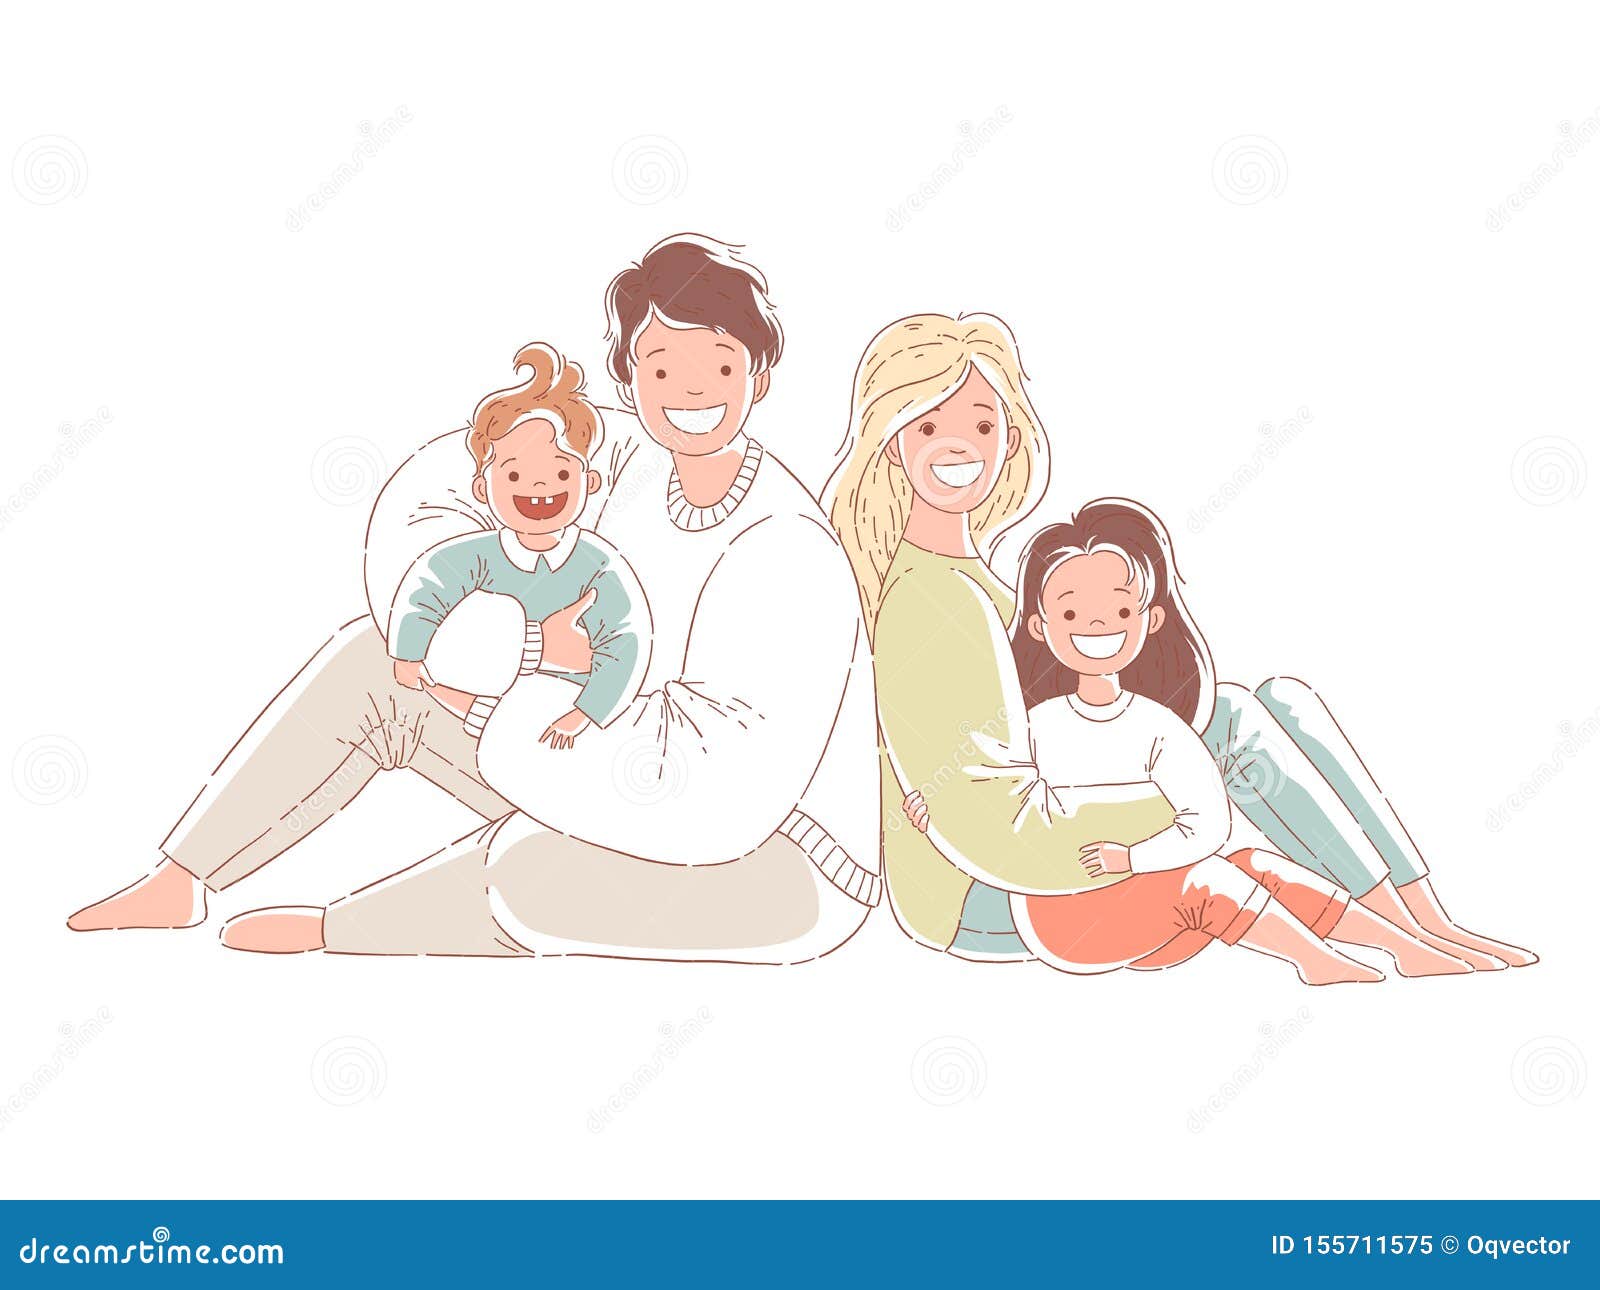 Parents and Children are Sitting on the Floor. a Happy Family. Hand